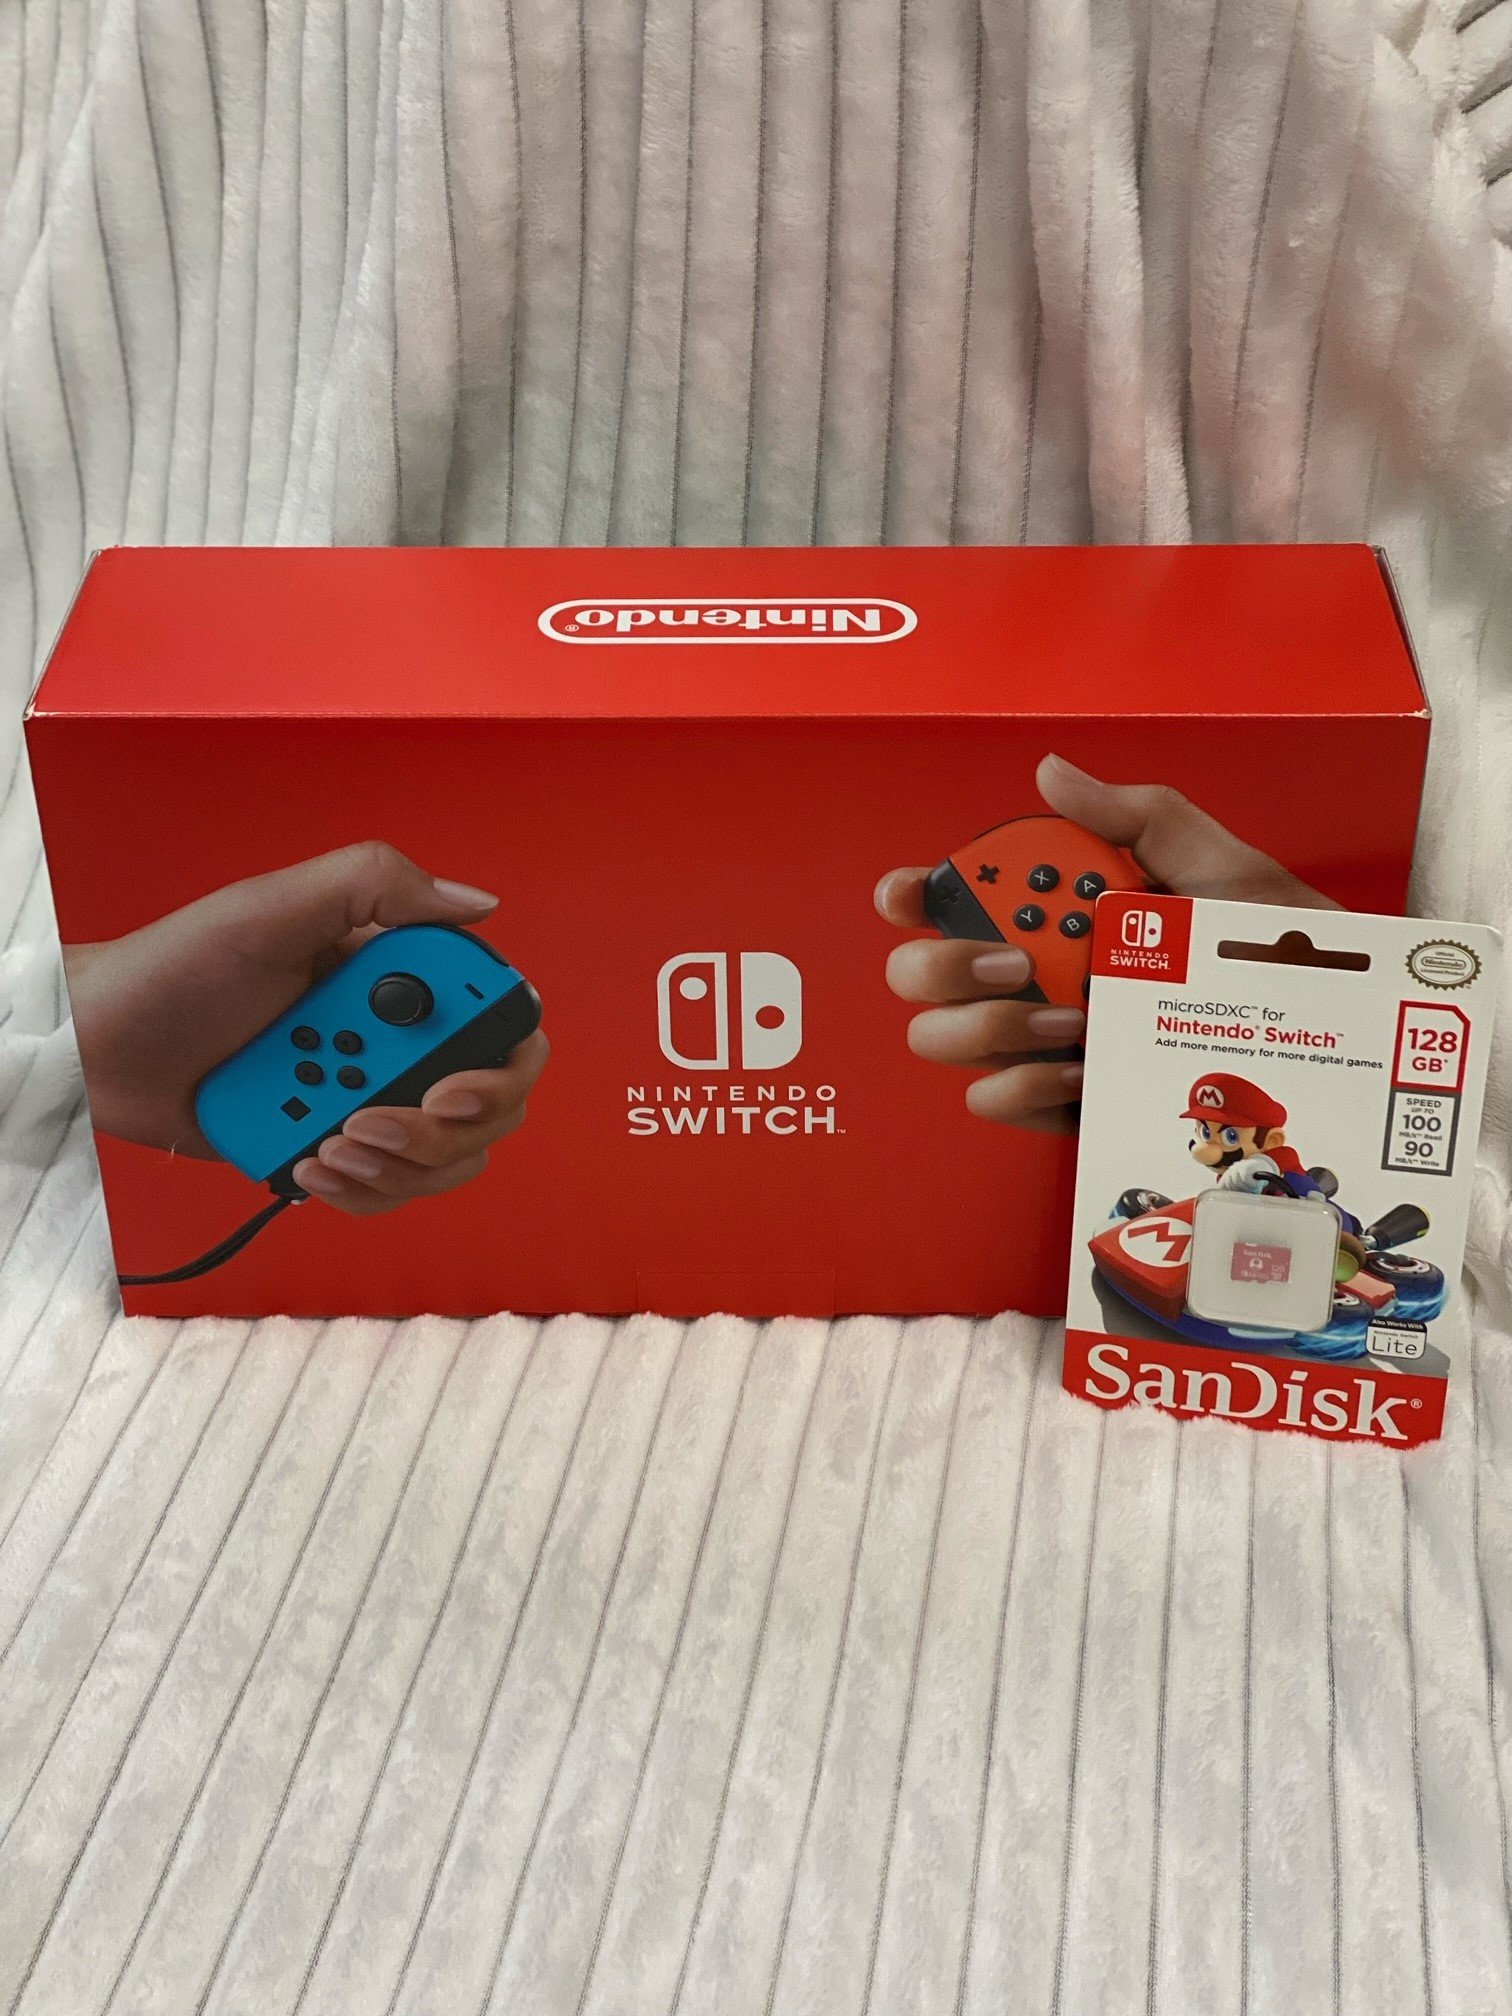 Raffle Nintendo Switch with 128 GB Memory Card — Amazement Square